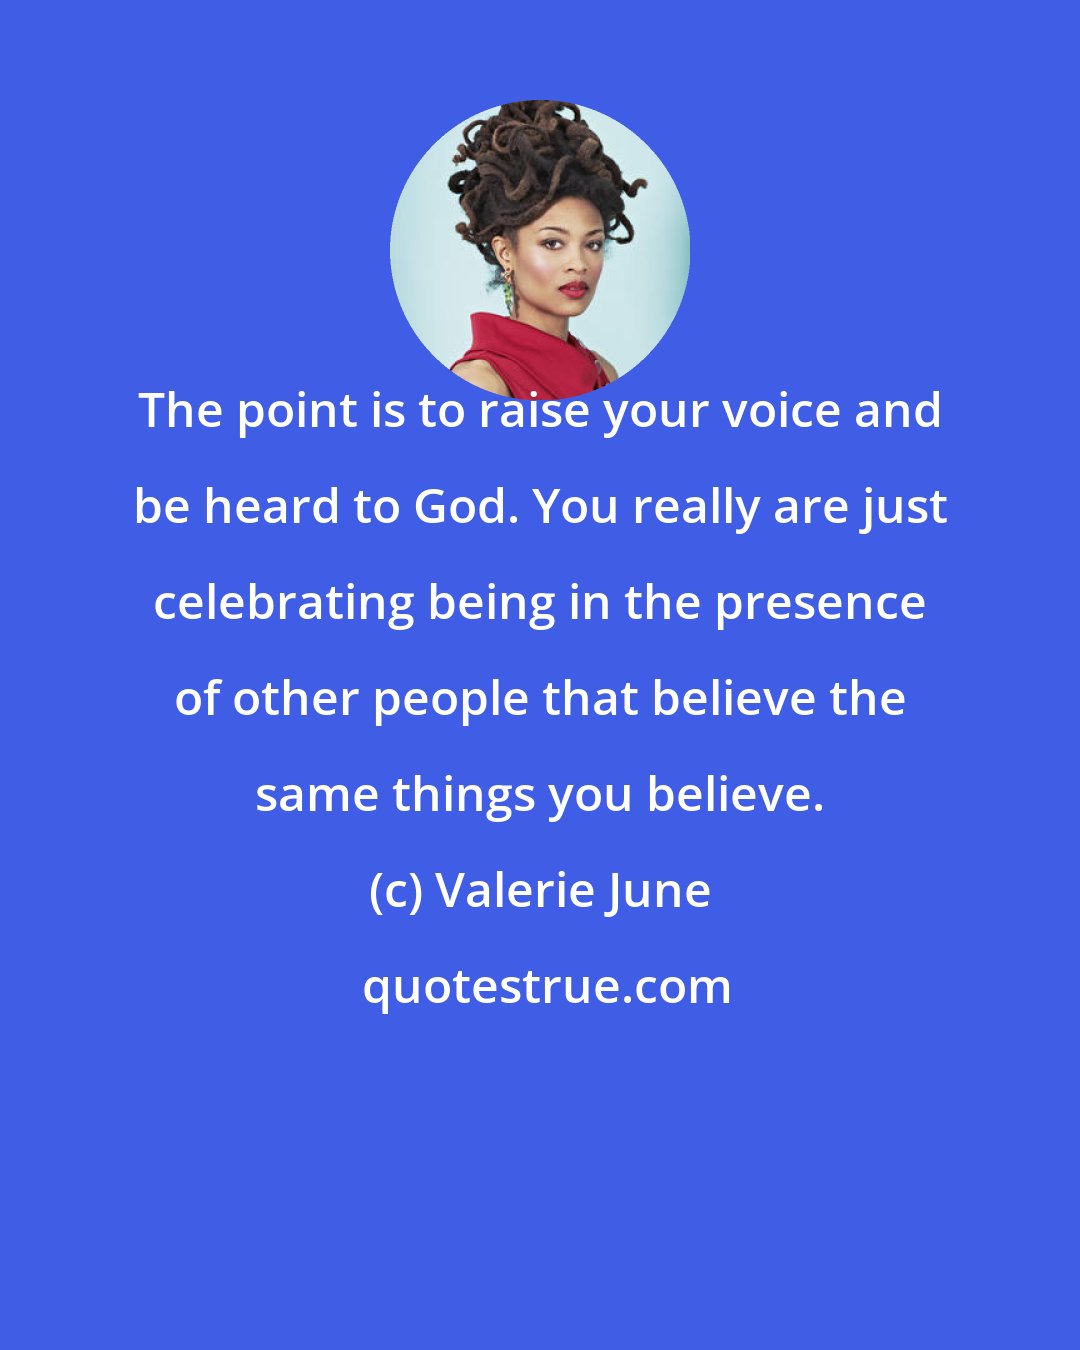 Valerie June: The point is to raise your voice and be heard to God. You really are just celebrating being in the presence of other people that believe the same things you believe.